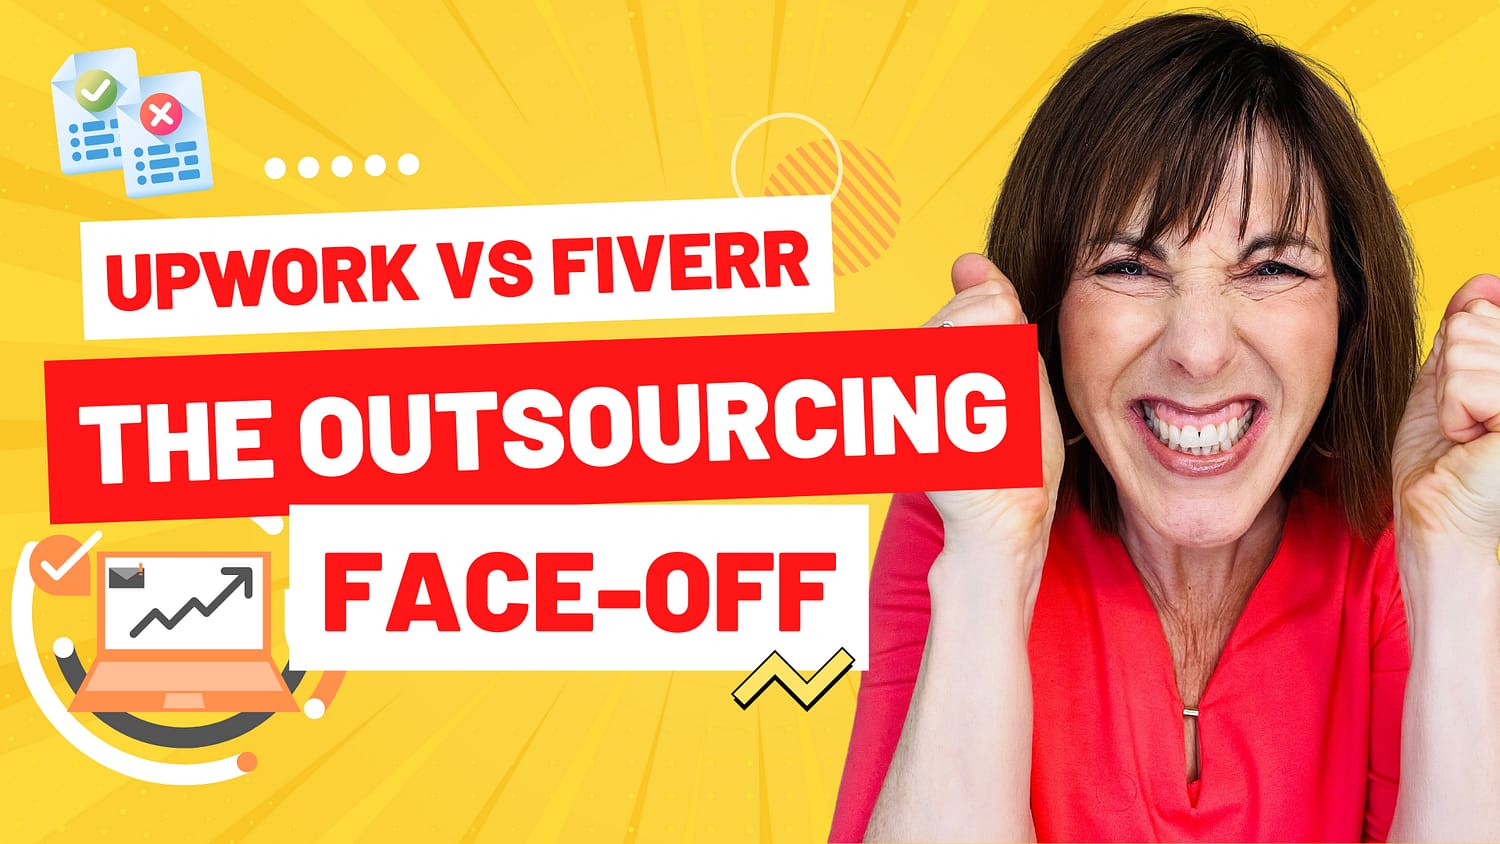 Upwork vs Fiverr – The Outsourcing Face-Off